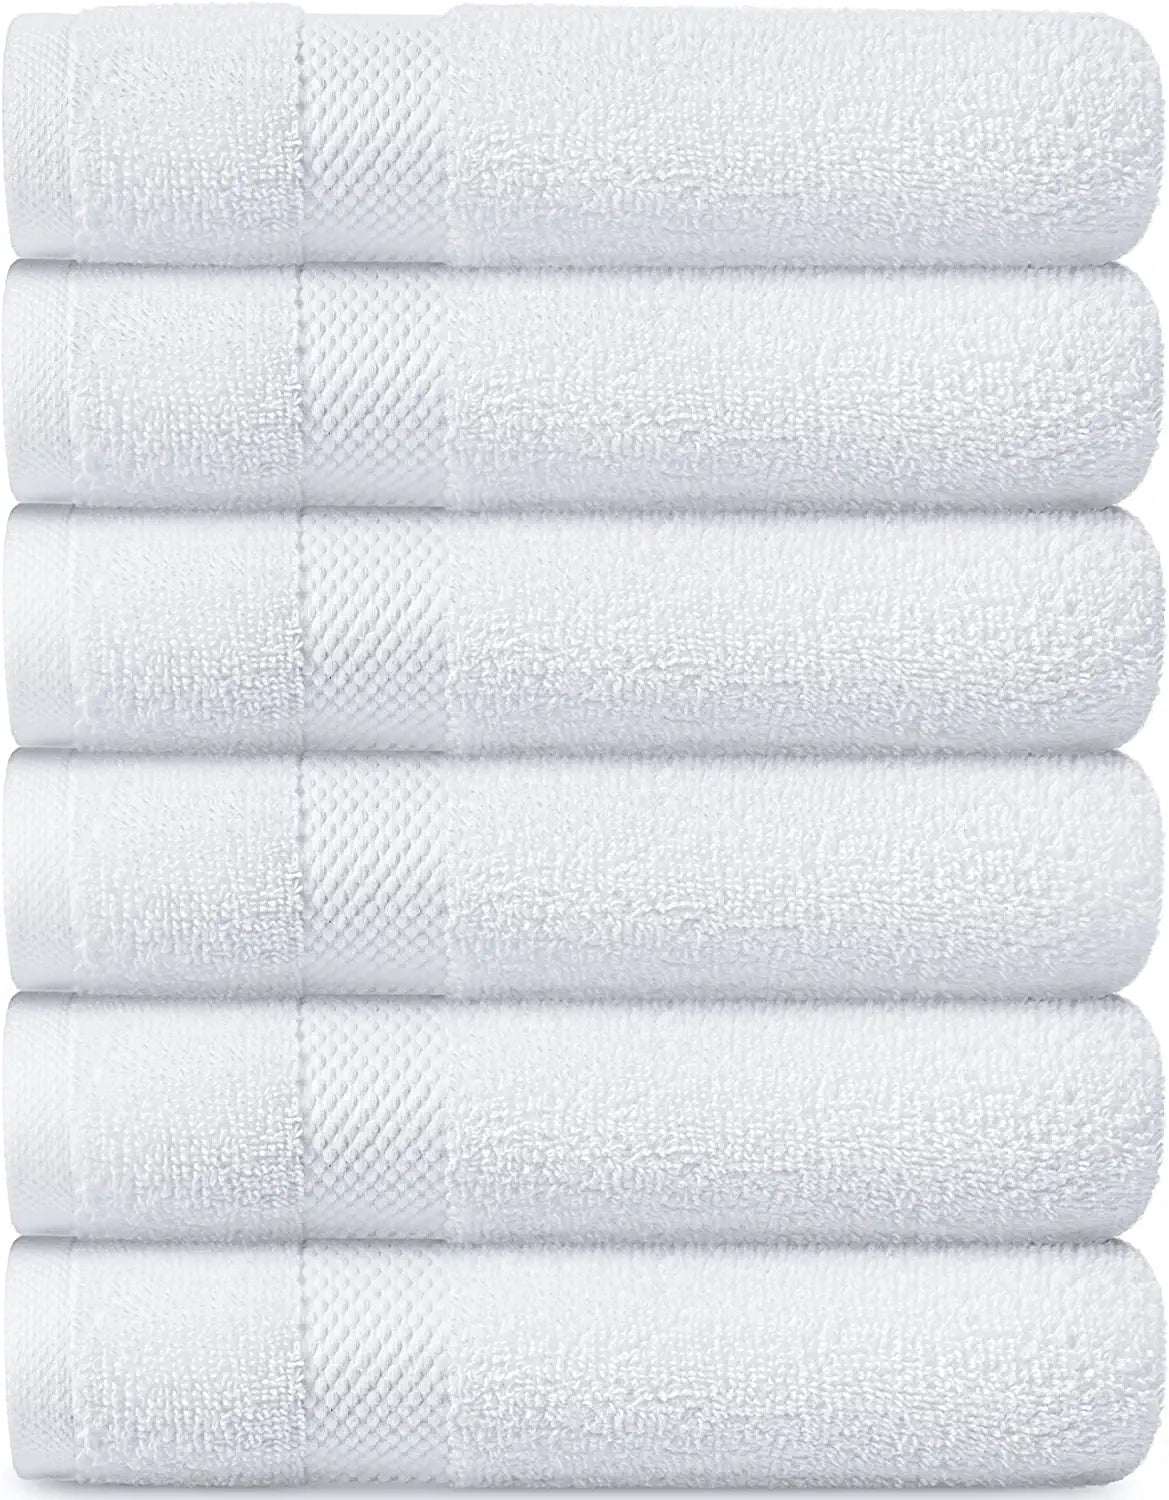 White Classic Luxury 100% Cotton Hand Towels Set of 6 - 16x30 Lavender